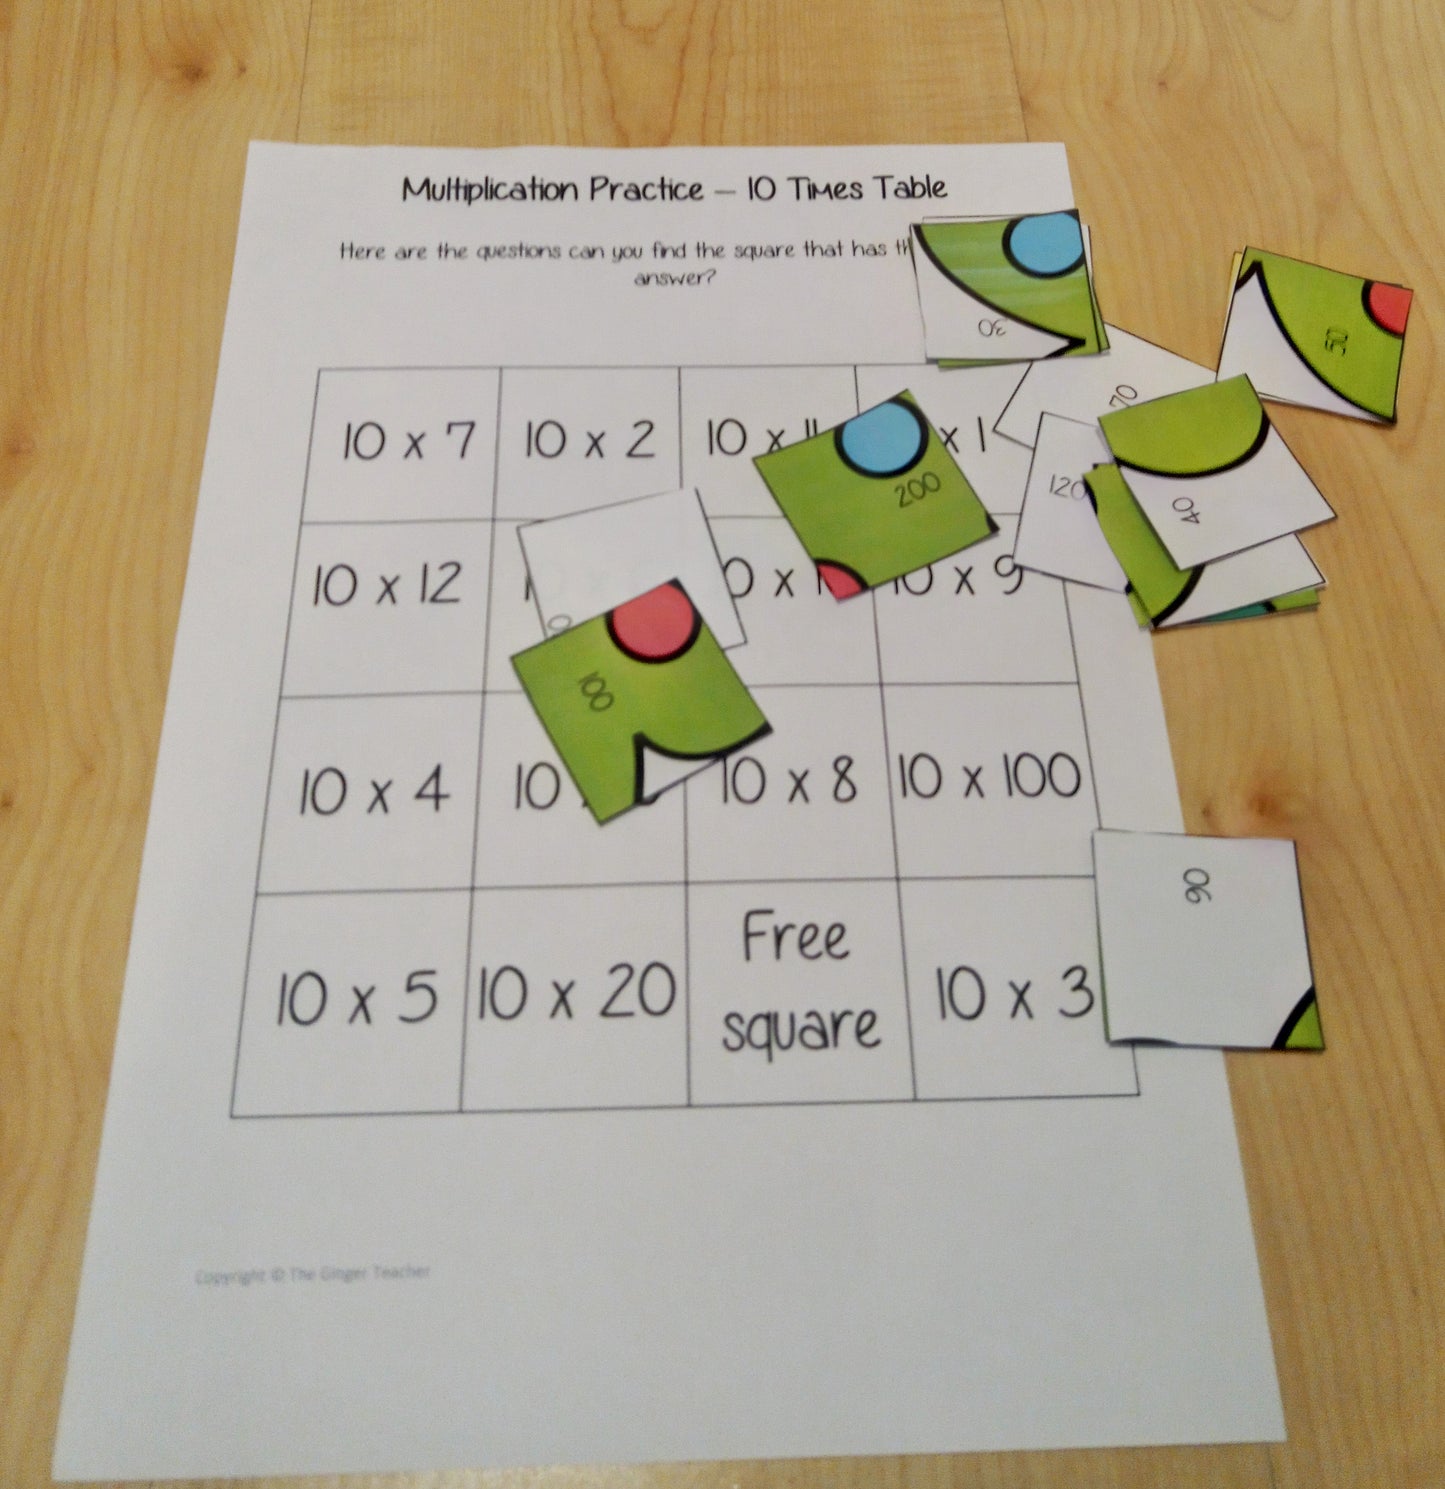 Christmas Themed Independent Multiplication Revision Sheets 10x No Prep independent revision activity for the ten times tables. Children have to cut out and stick the correct answer to the question square, when the correct squares are all in place a christmas themed picture will be revealed. #teachmultiplication #revisemultiplication #tentimestables #noprep #mathsworksheets